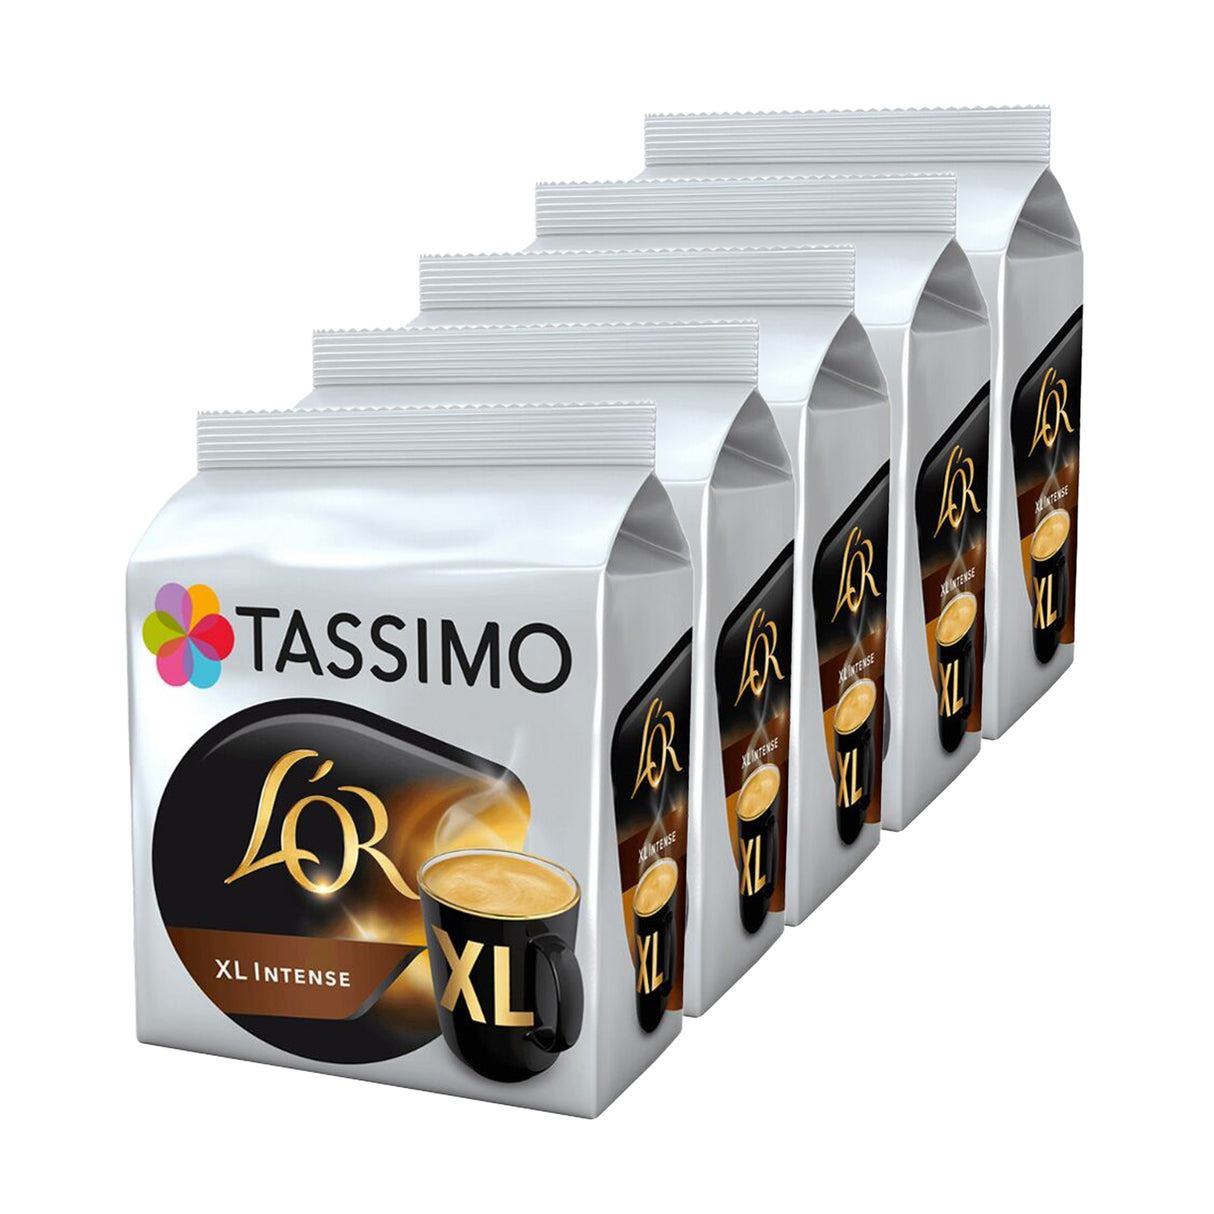 Tassimo L'OR XL Intense 5 pack